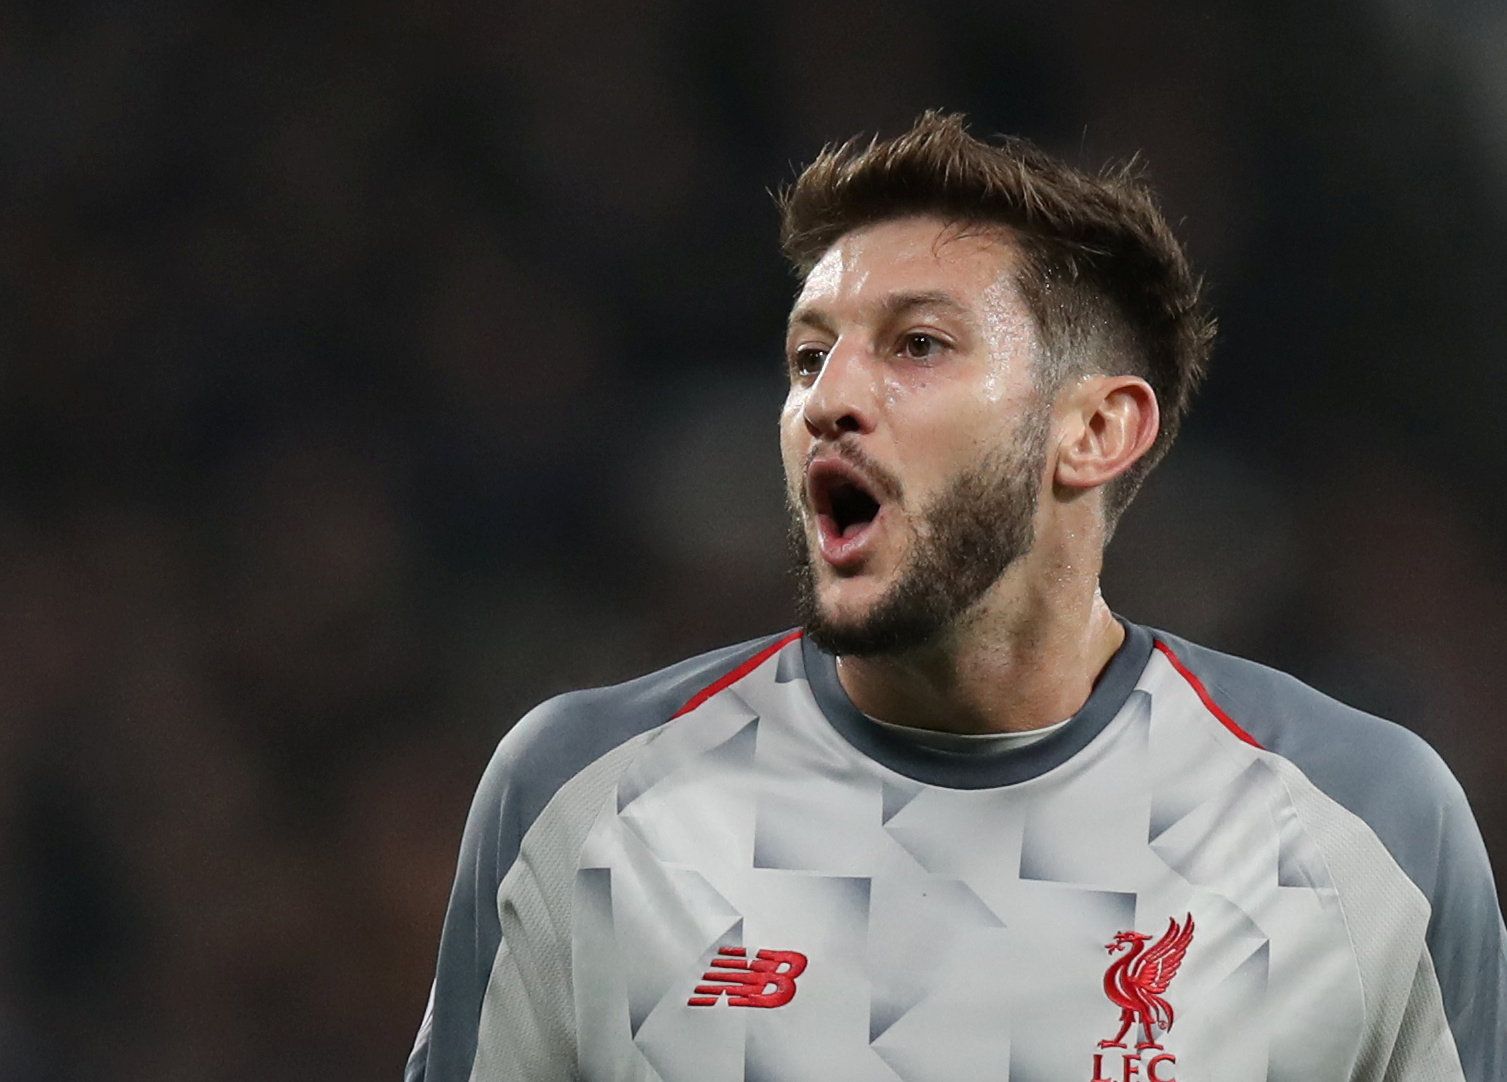 Soccer Football - Premier League - West Ham United v Liverpool - London Stadium, London, Britain - February 4, 2019  Liverpool's Adam Lallana during the match          REUTERS/David Klein  EDITORIAL USE ONLY. No use with unauthorized audio, video, data, fixture lists, club/league logos or "live" services. Online in-match use limited to 75 images, no video emulation. No use in betting, games or single club/league/player publications.  Please contact your account representative for further details